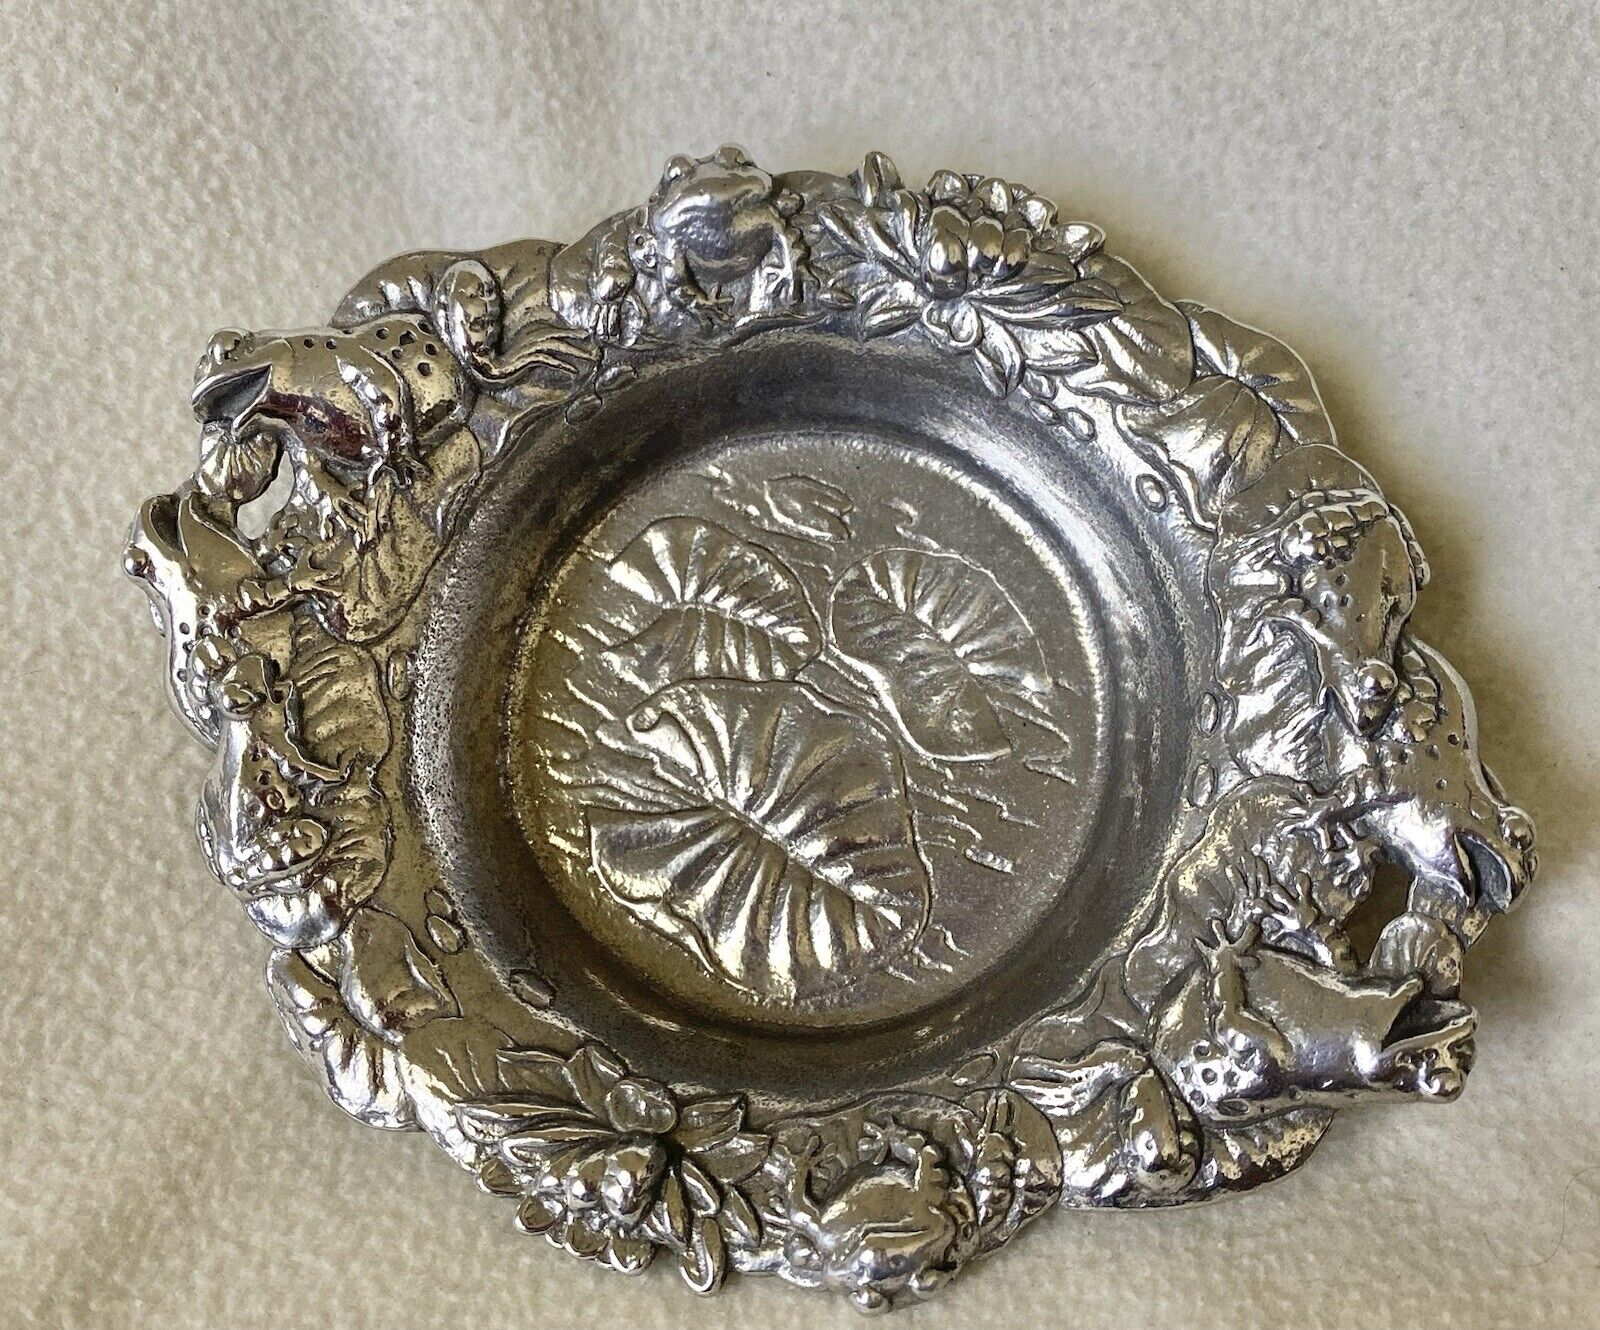 Vintage Arthur Court 7” Small Aluminum Metal Serving Bowl Frogs Lily Pad 1994